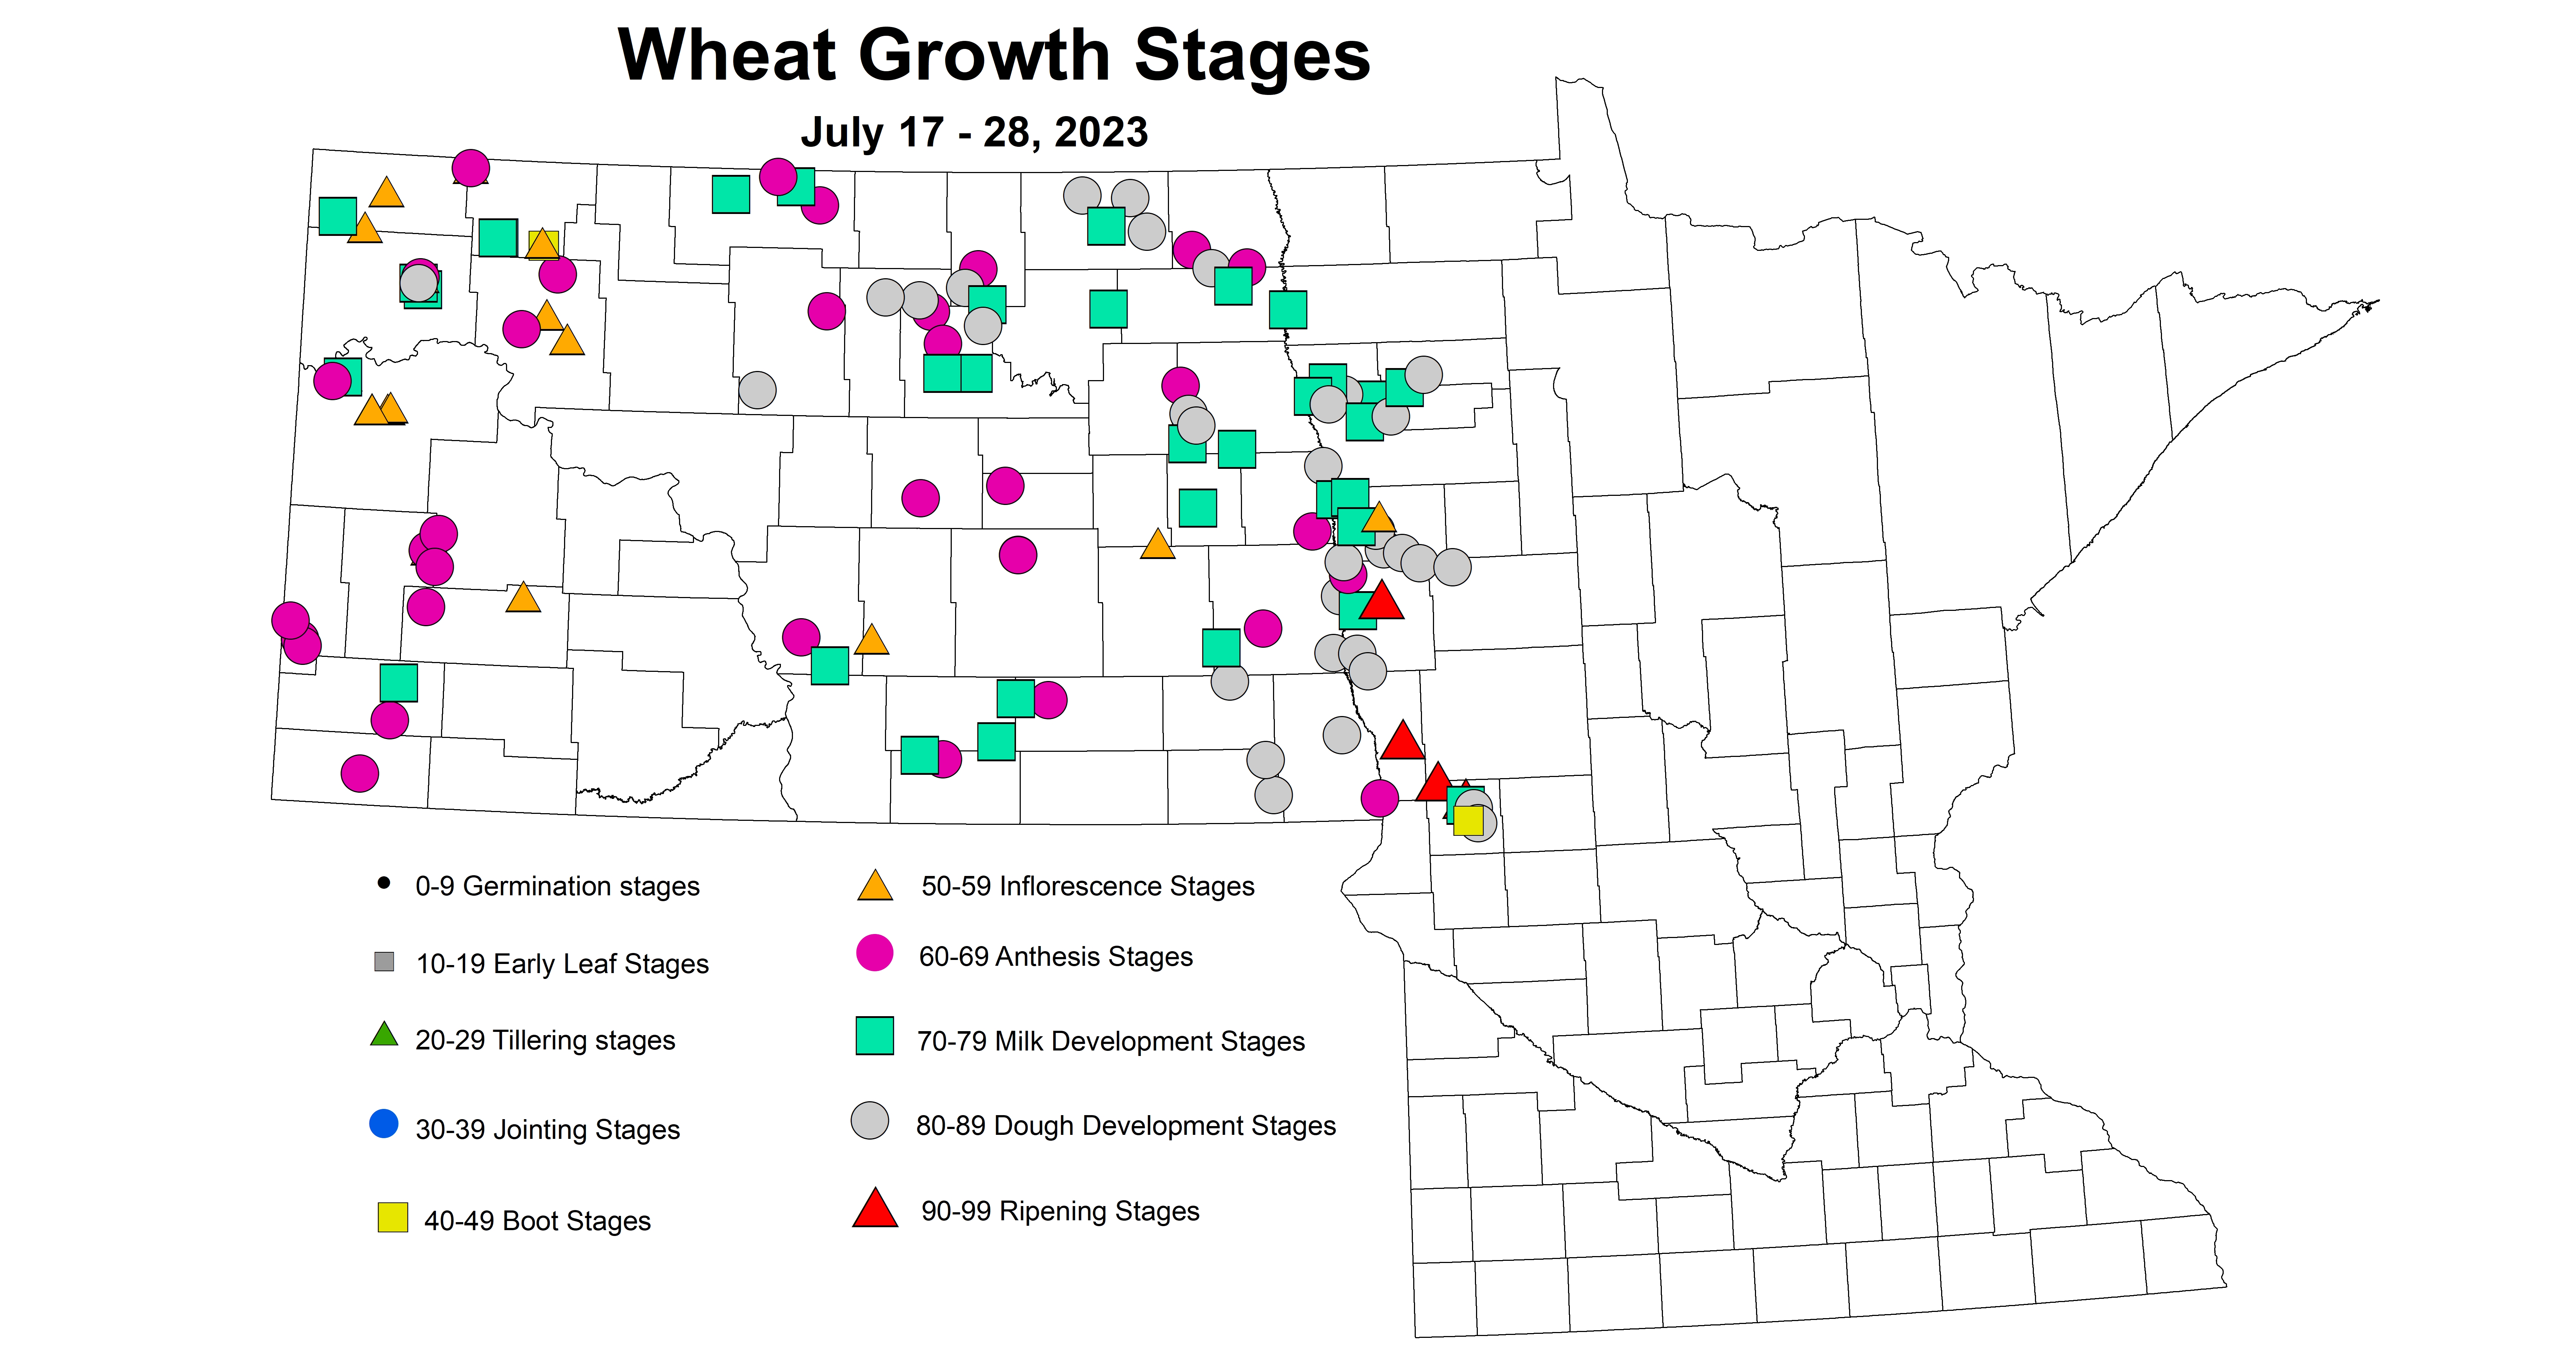 wheat growth stages July 17-28 2023